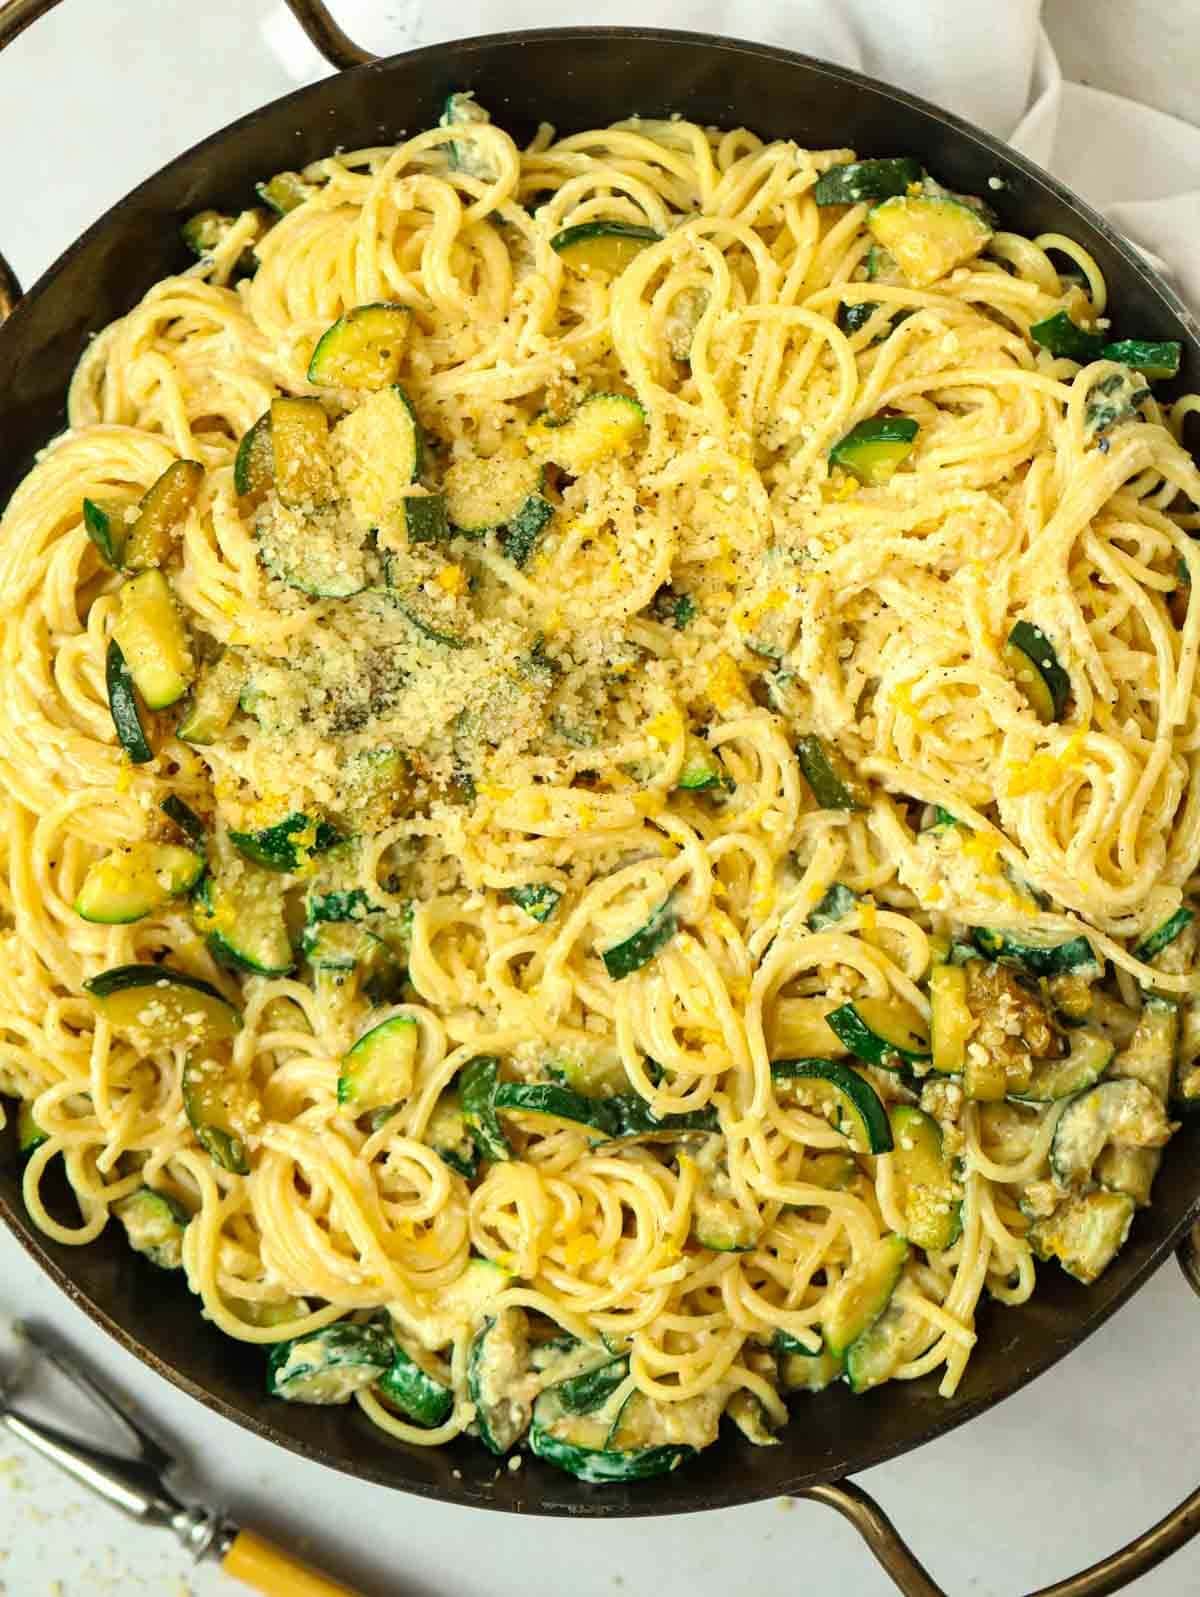 A big pan full of courgette pasta.